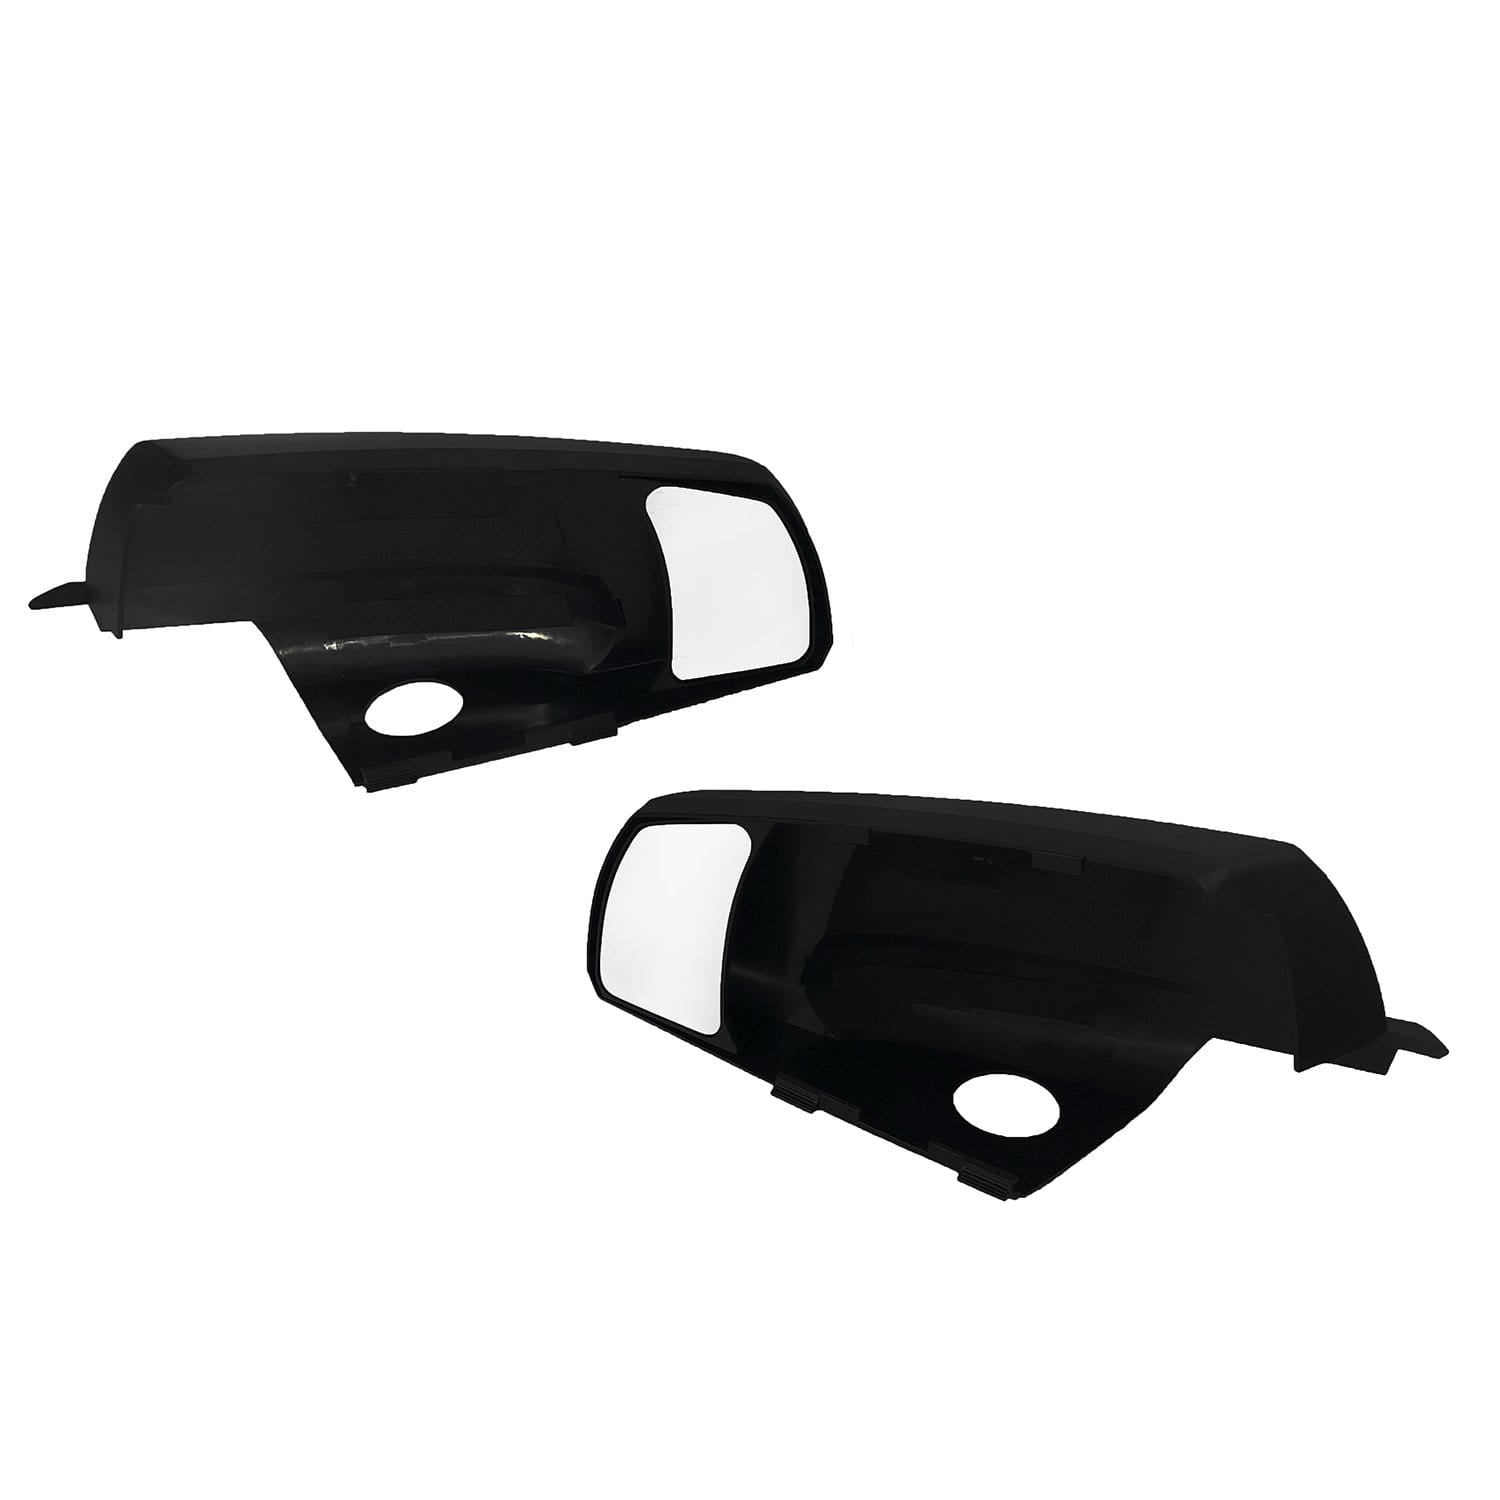 K Source 81300 Snap & Zap Exterior Towing Mirrors For 2007-2021 Toyota Tundra/2007-2021 Toyota Sequoia